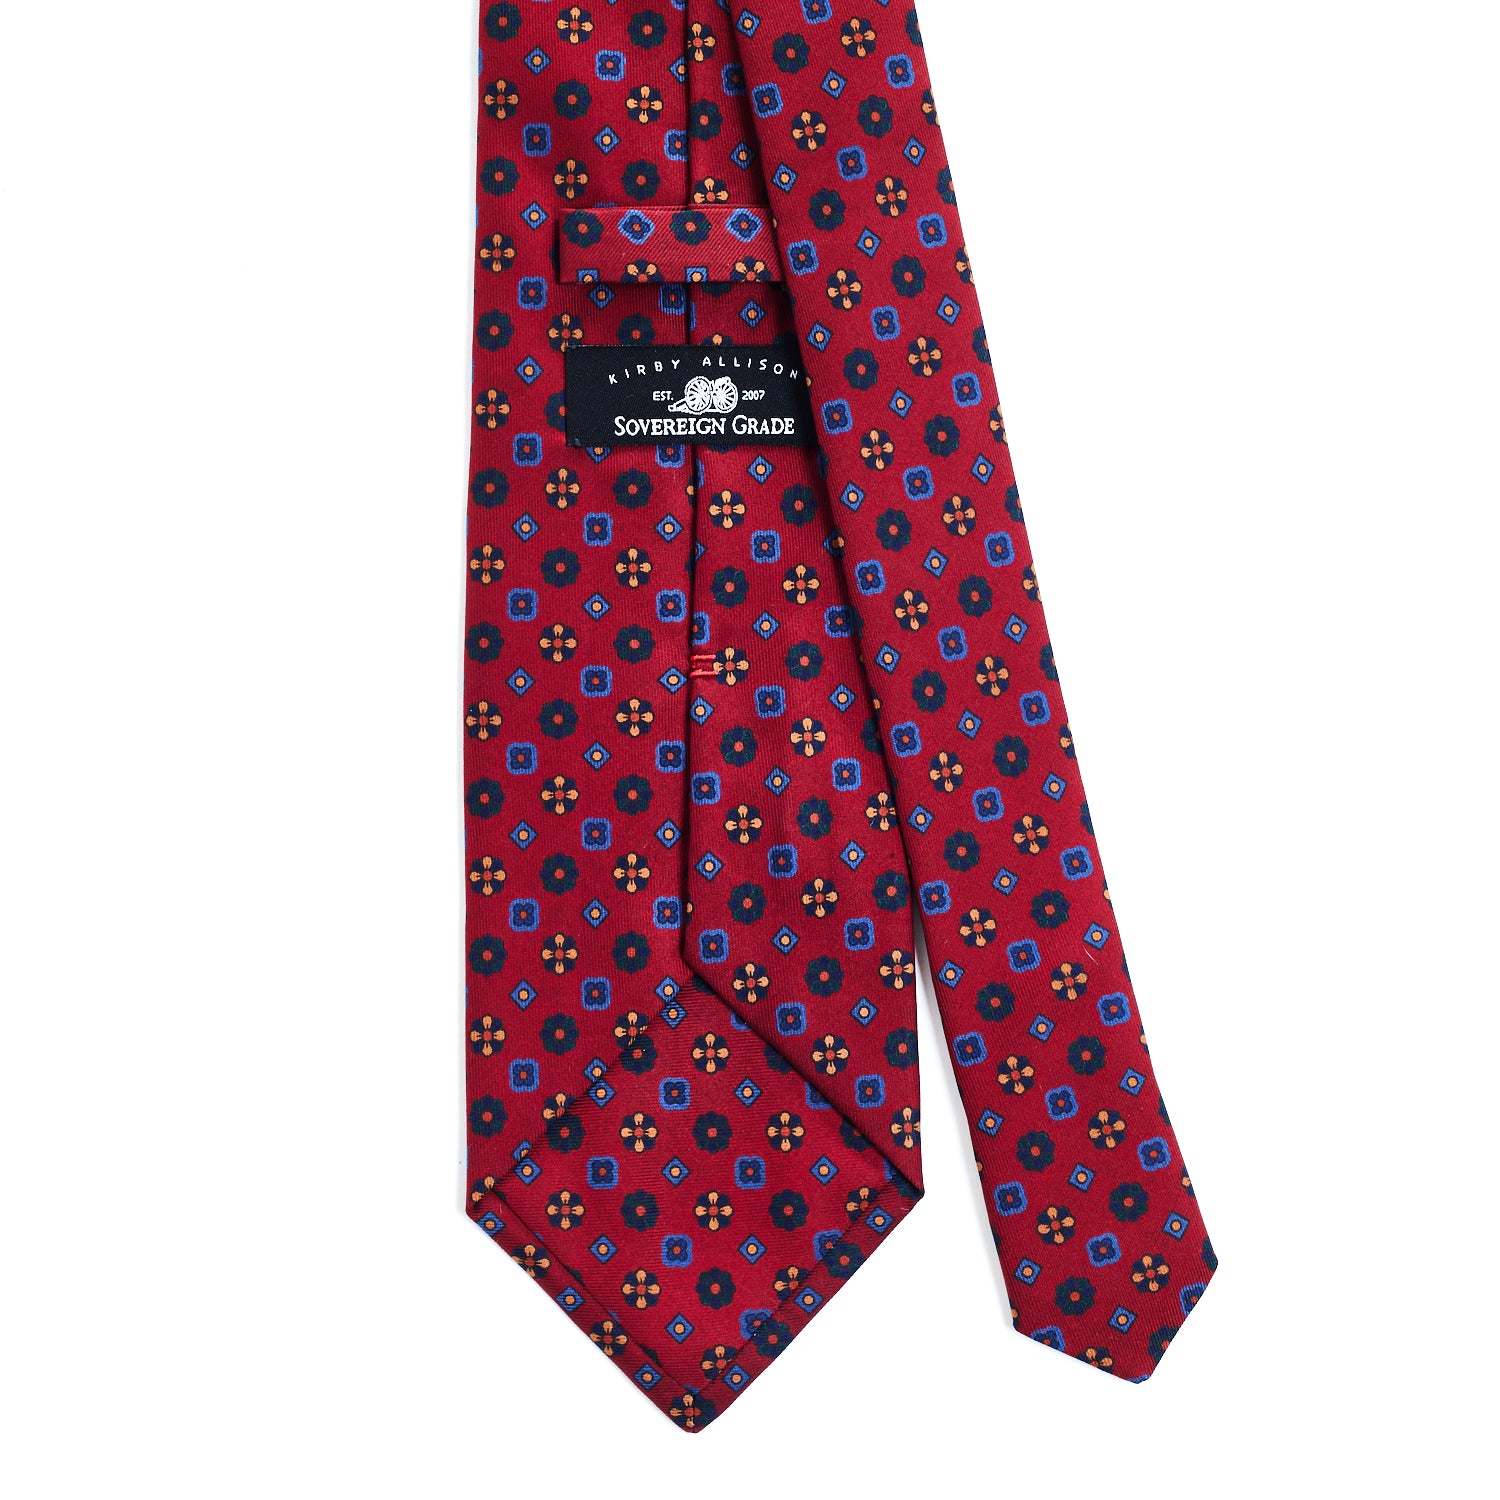 A high-quality Sovereign Grade Red Mixed Floret Ancient Madder Tie with a blue and red pattern by KirbyAllison.com.